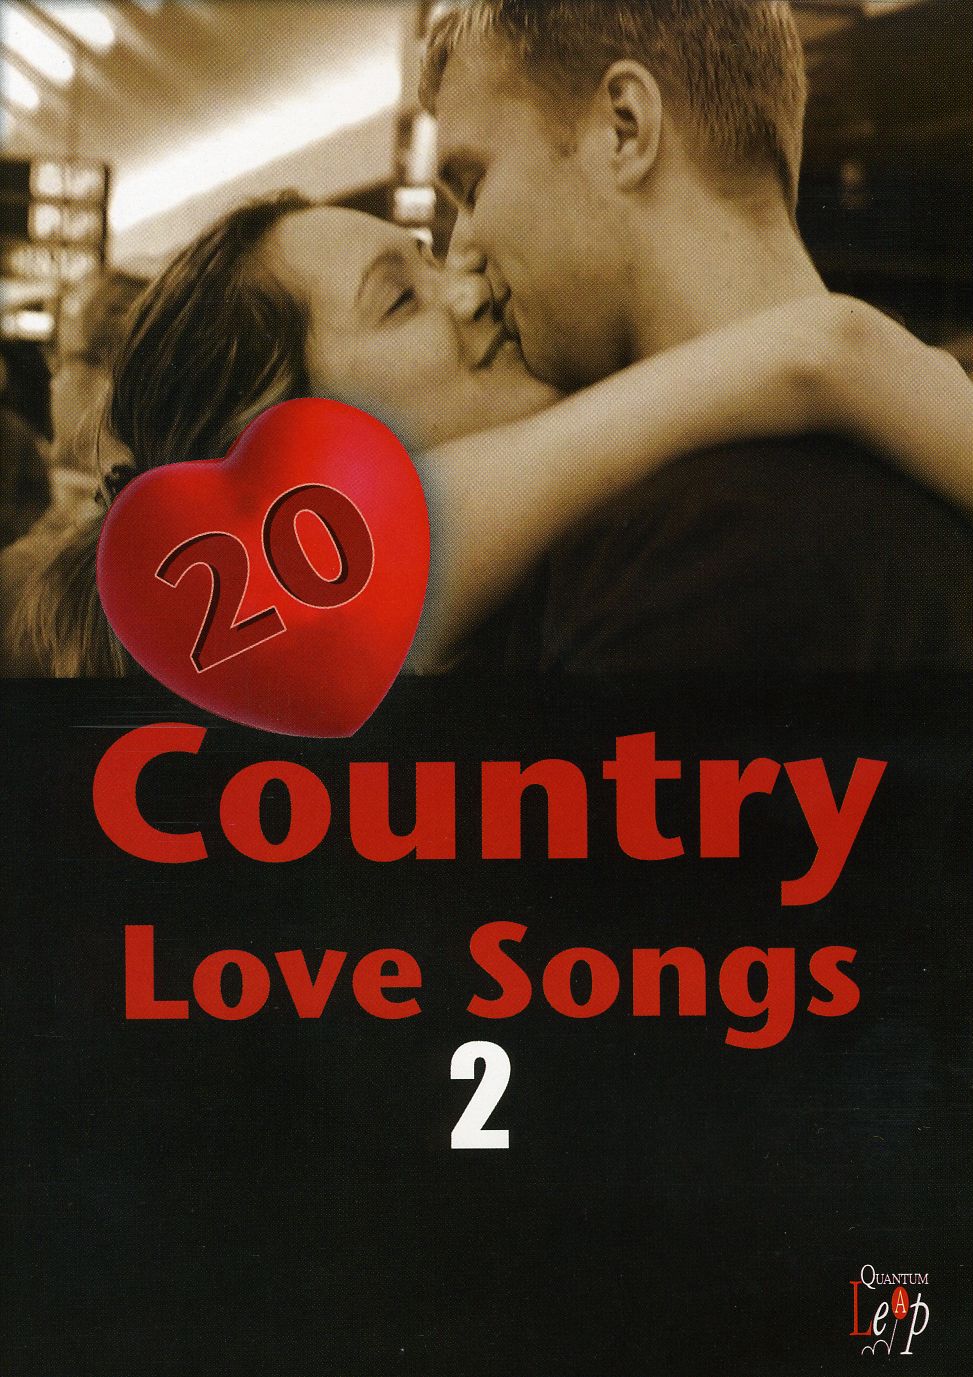 20 COUNTRY LOVE SONGS 2 / VARIOUS